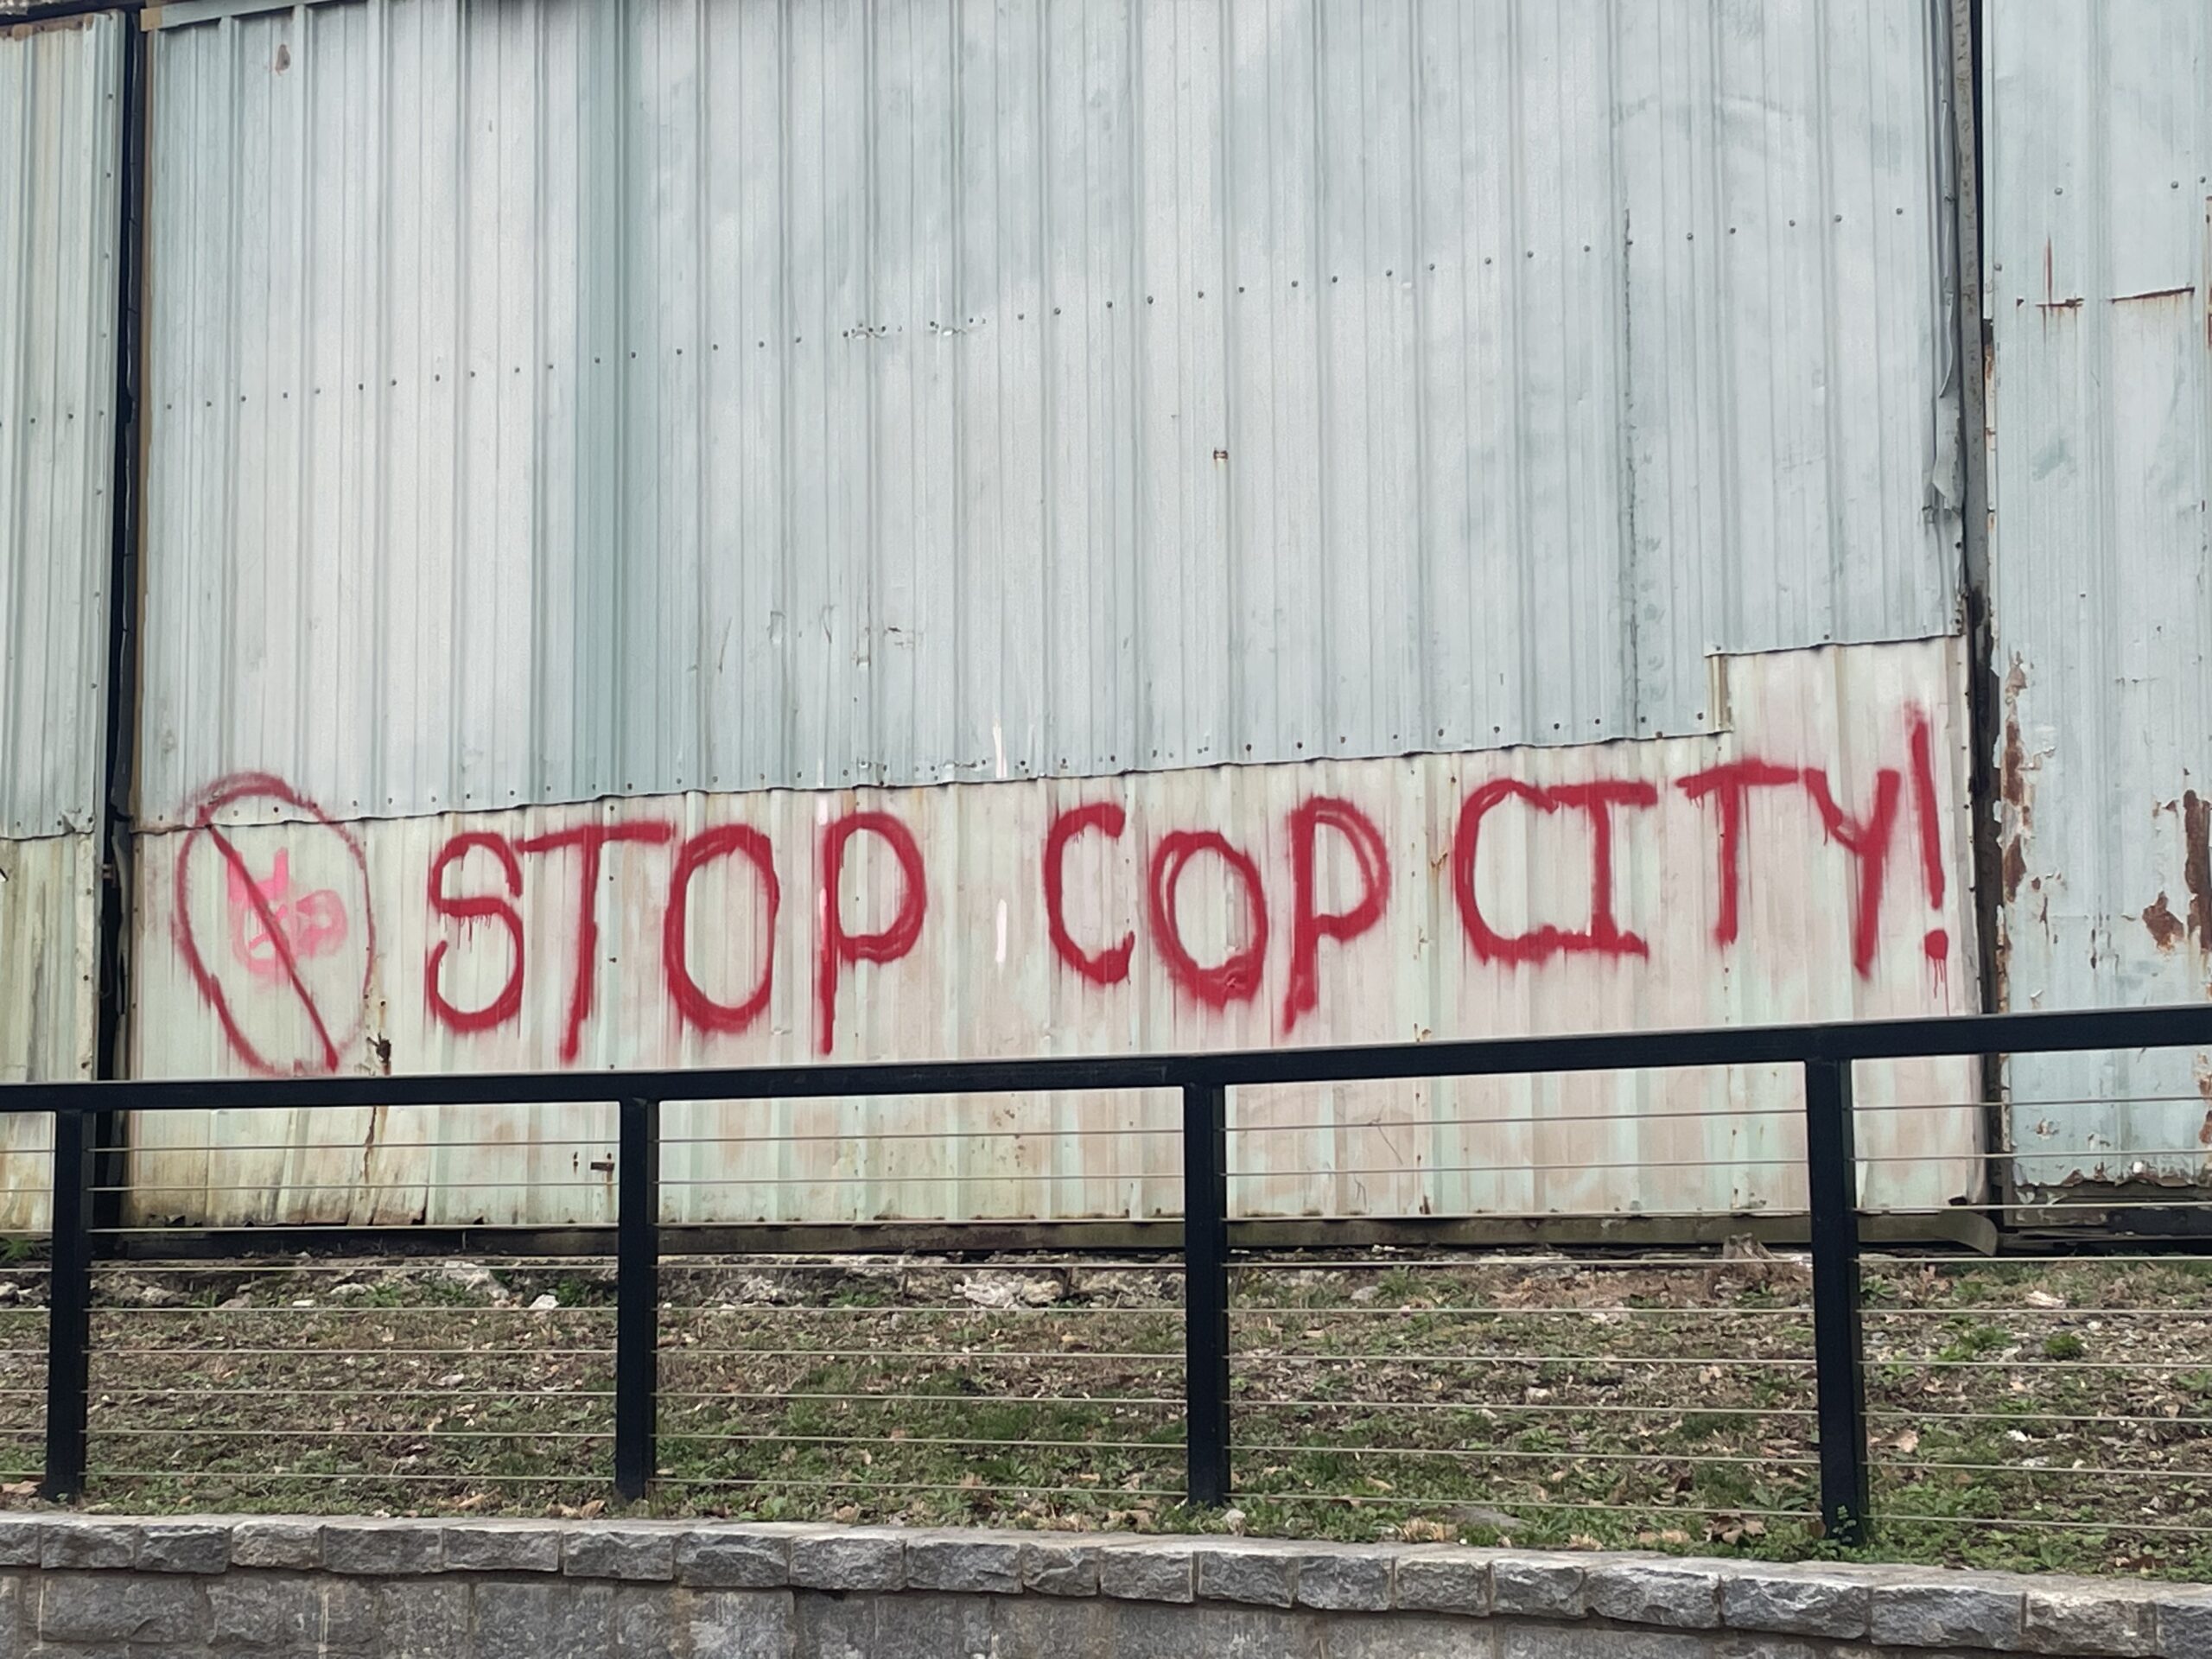 Lessons from Cop City